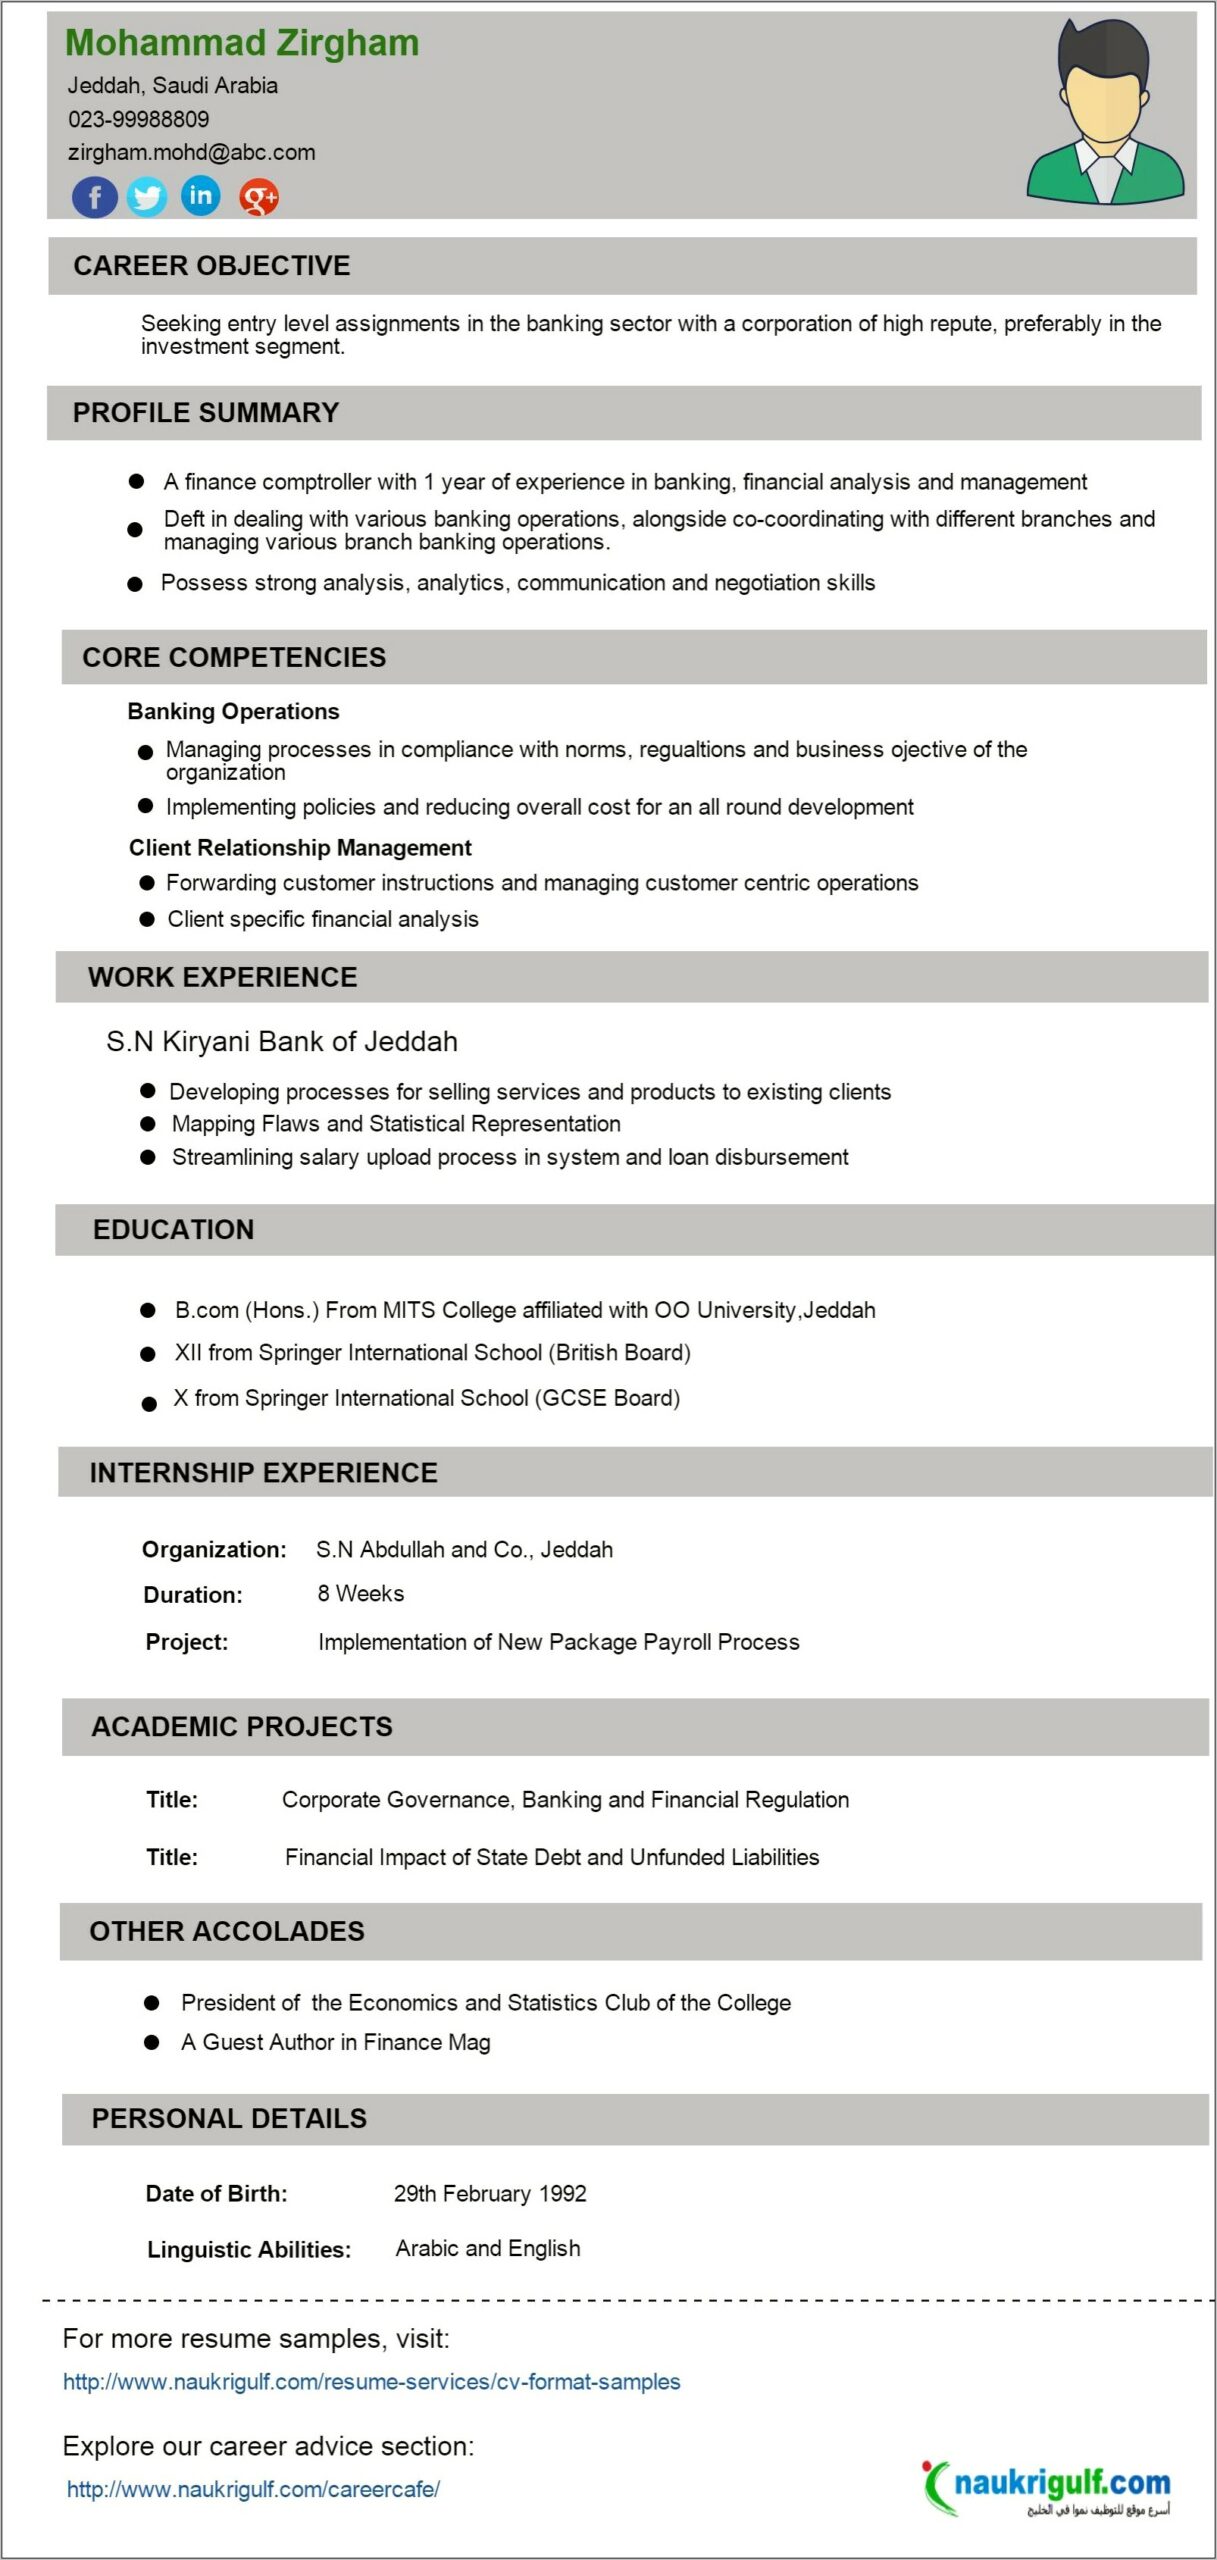 Resume Objective For A Banking Job